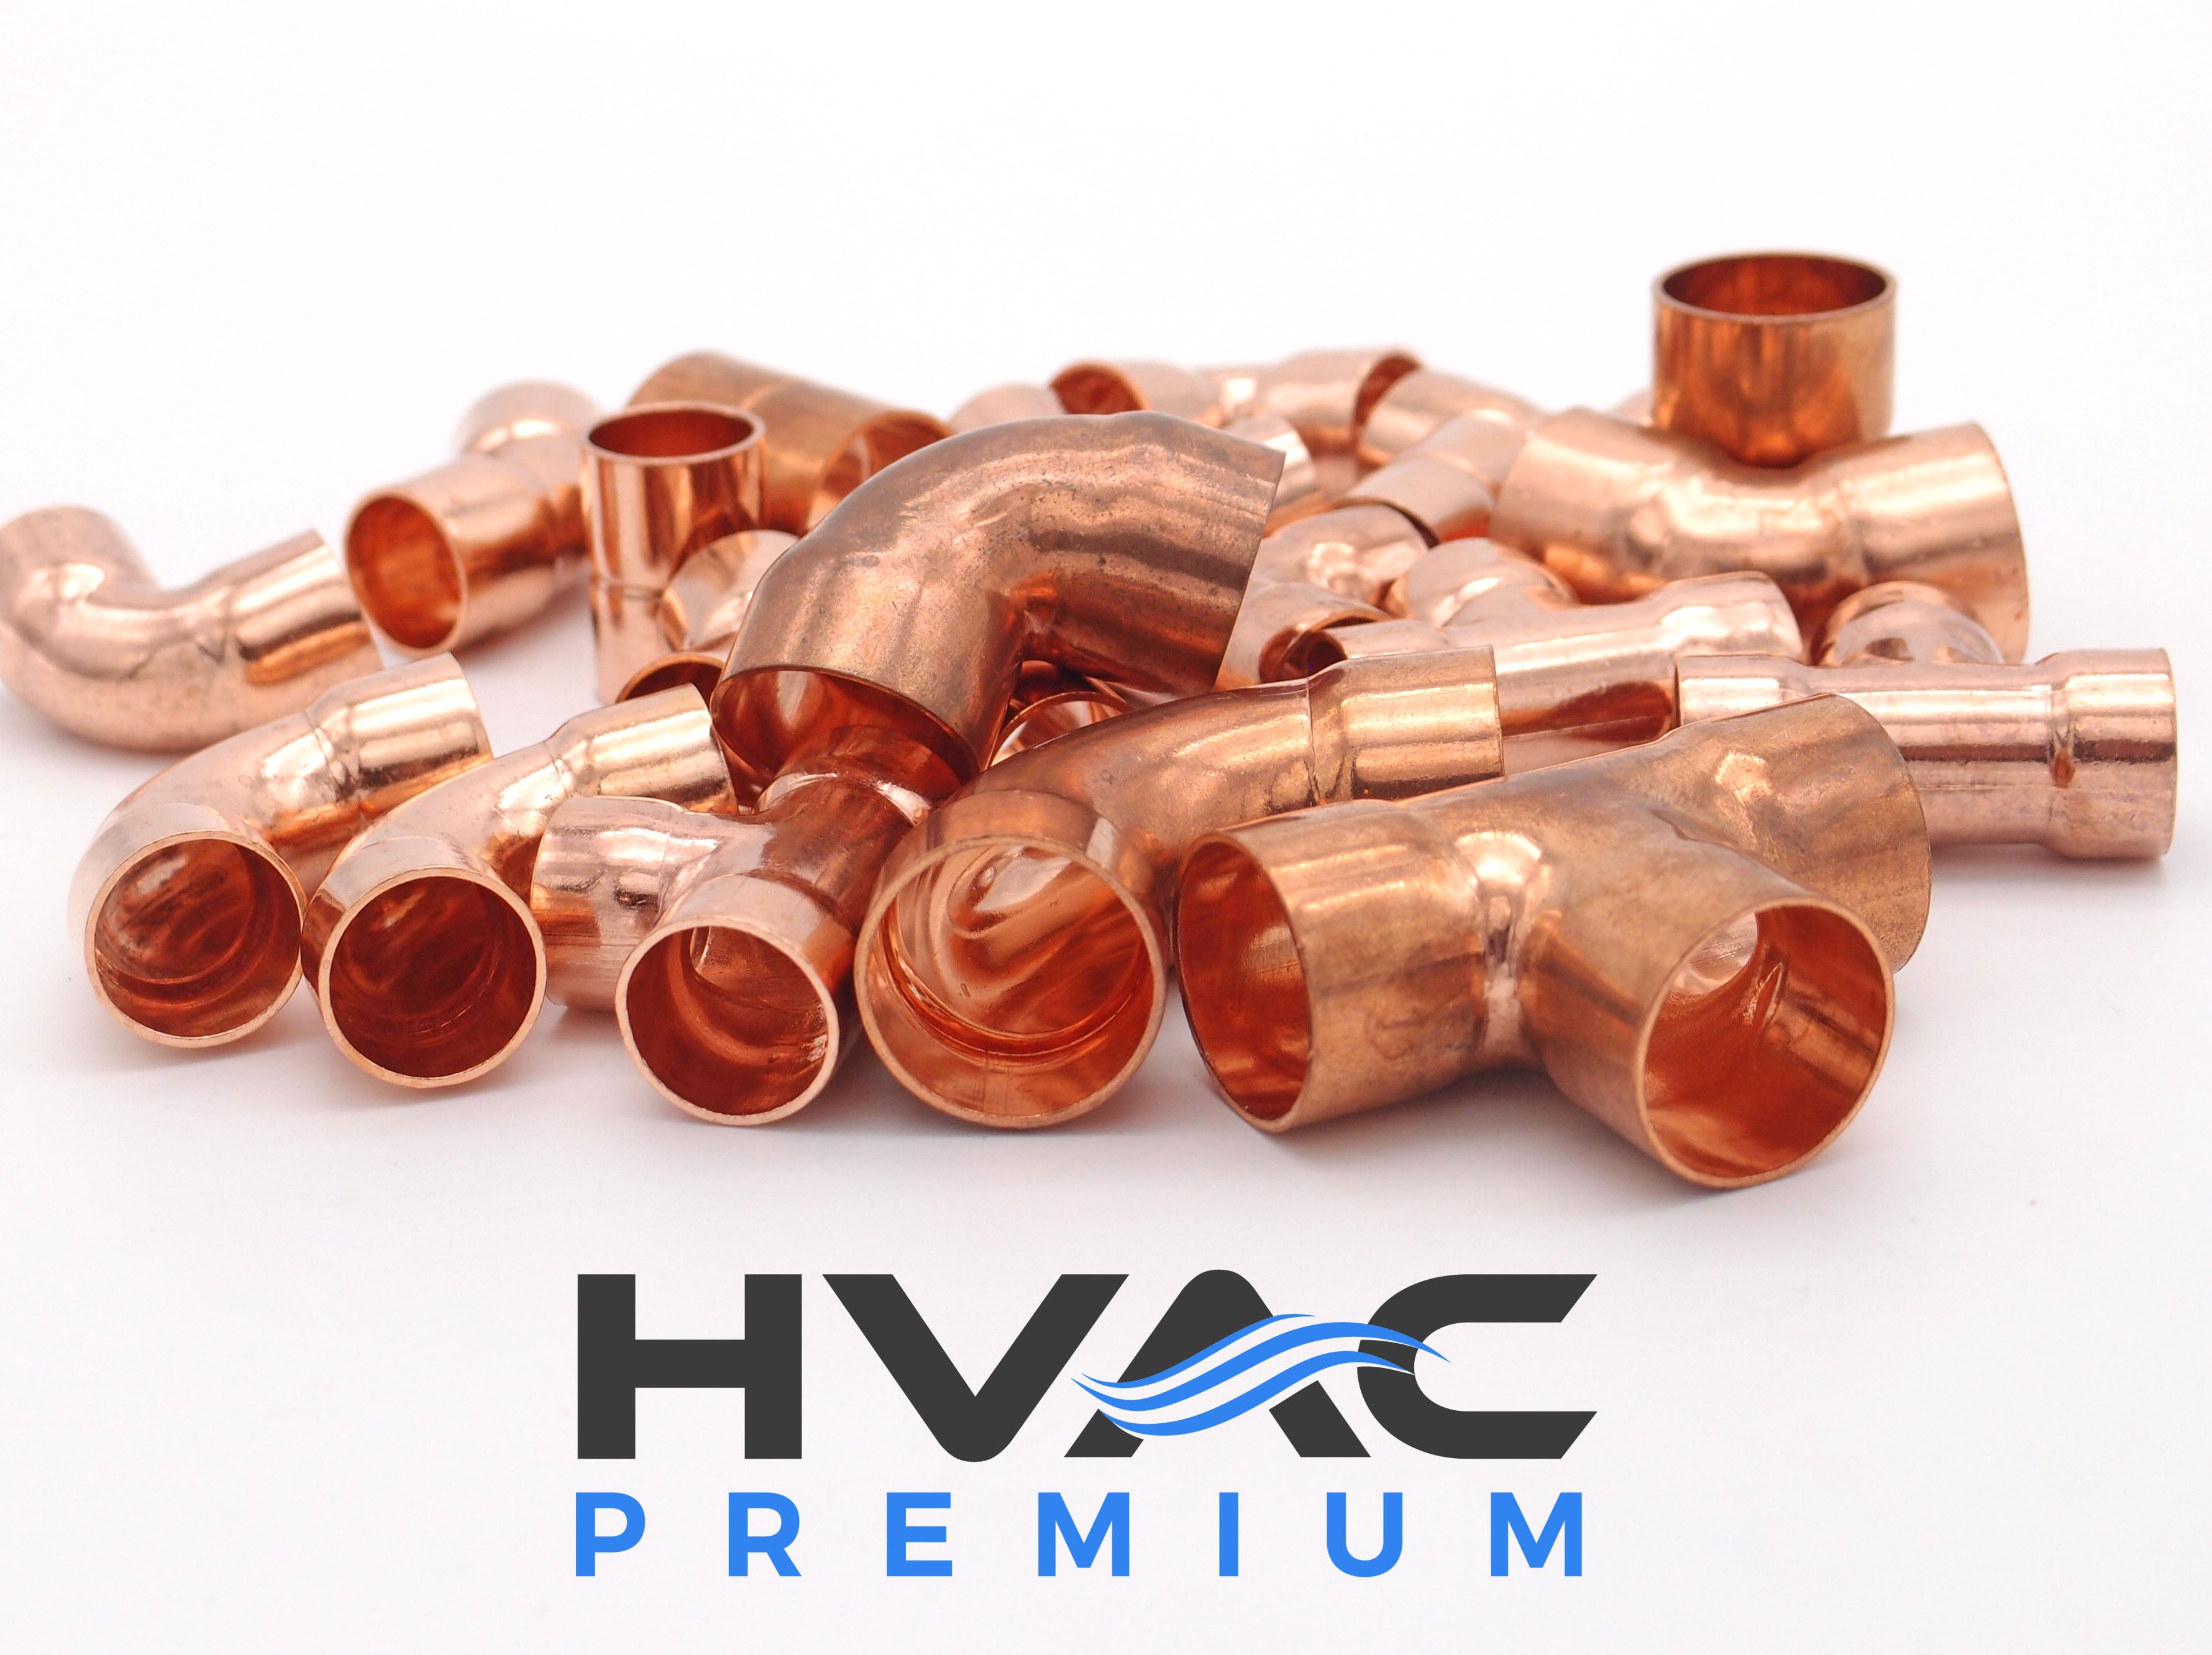 Copper Fitting 7/8 to 1/2 (HVAC Dimensions) Reducer / Increaser Copper Coupling & HVAC – 3/4 to 3/8 (Plumbing Inner Dimensions) 99.9% Pure Copper - 5 Pack